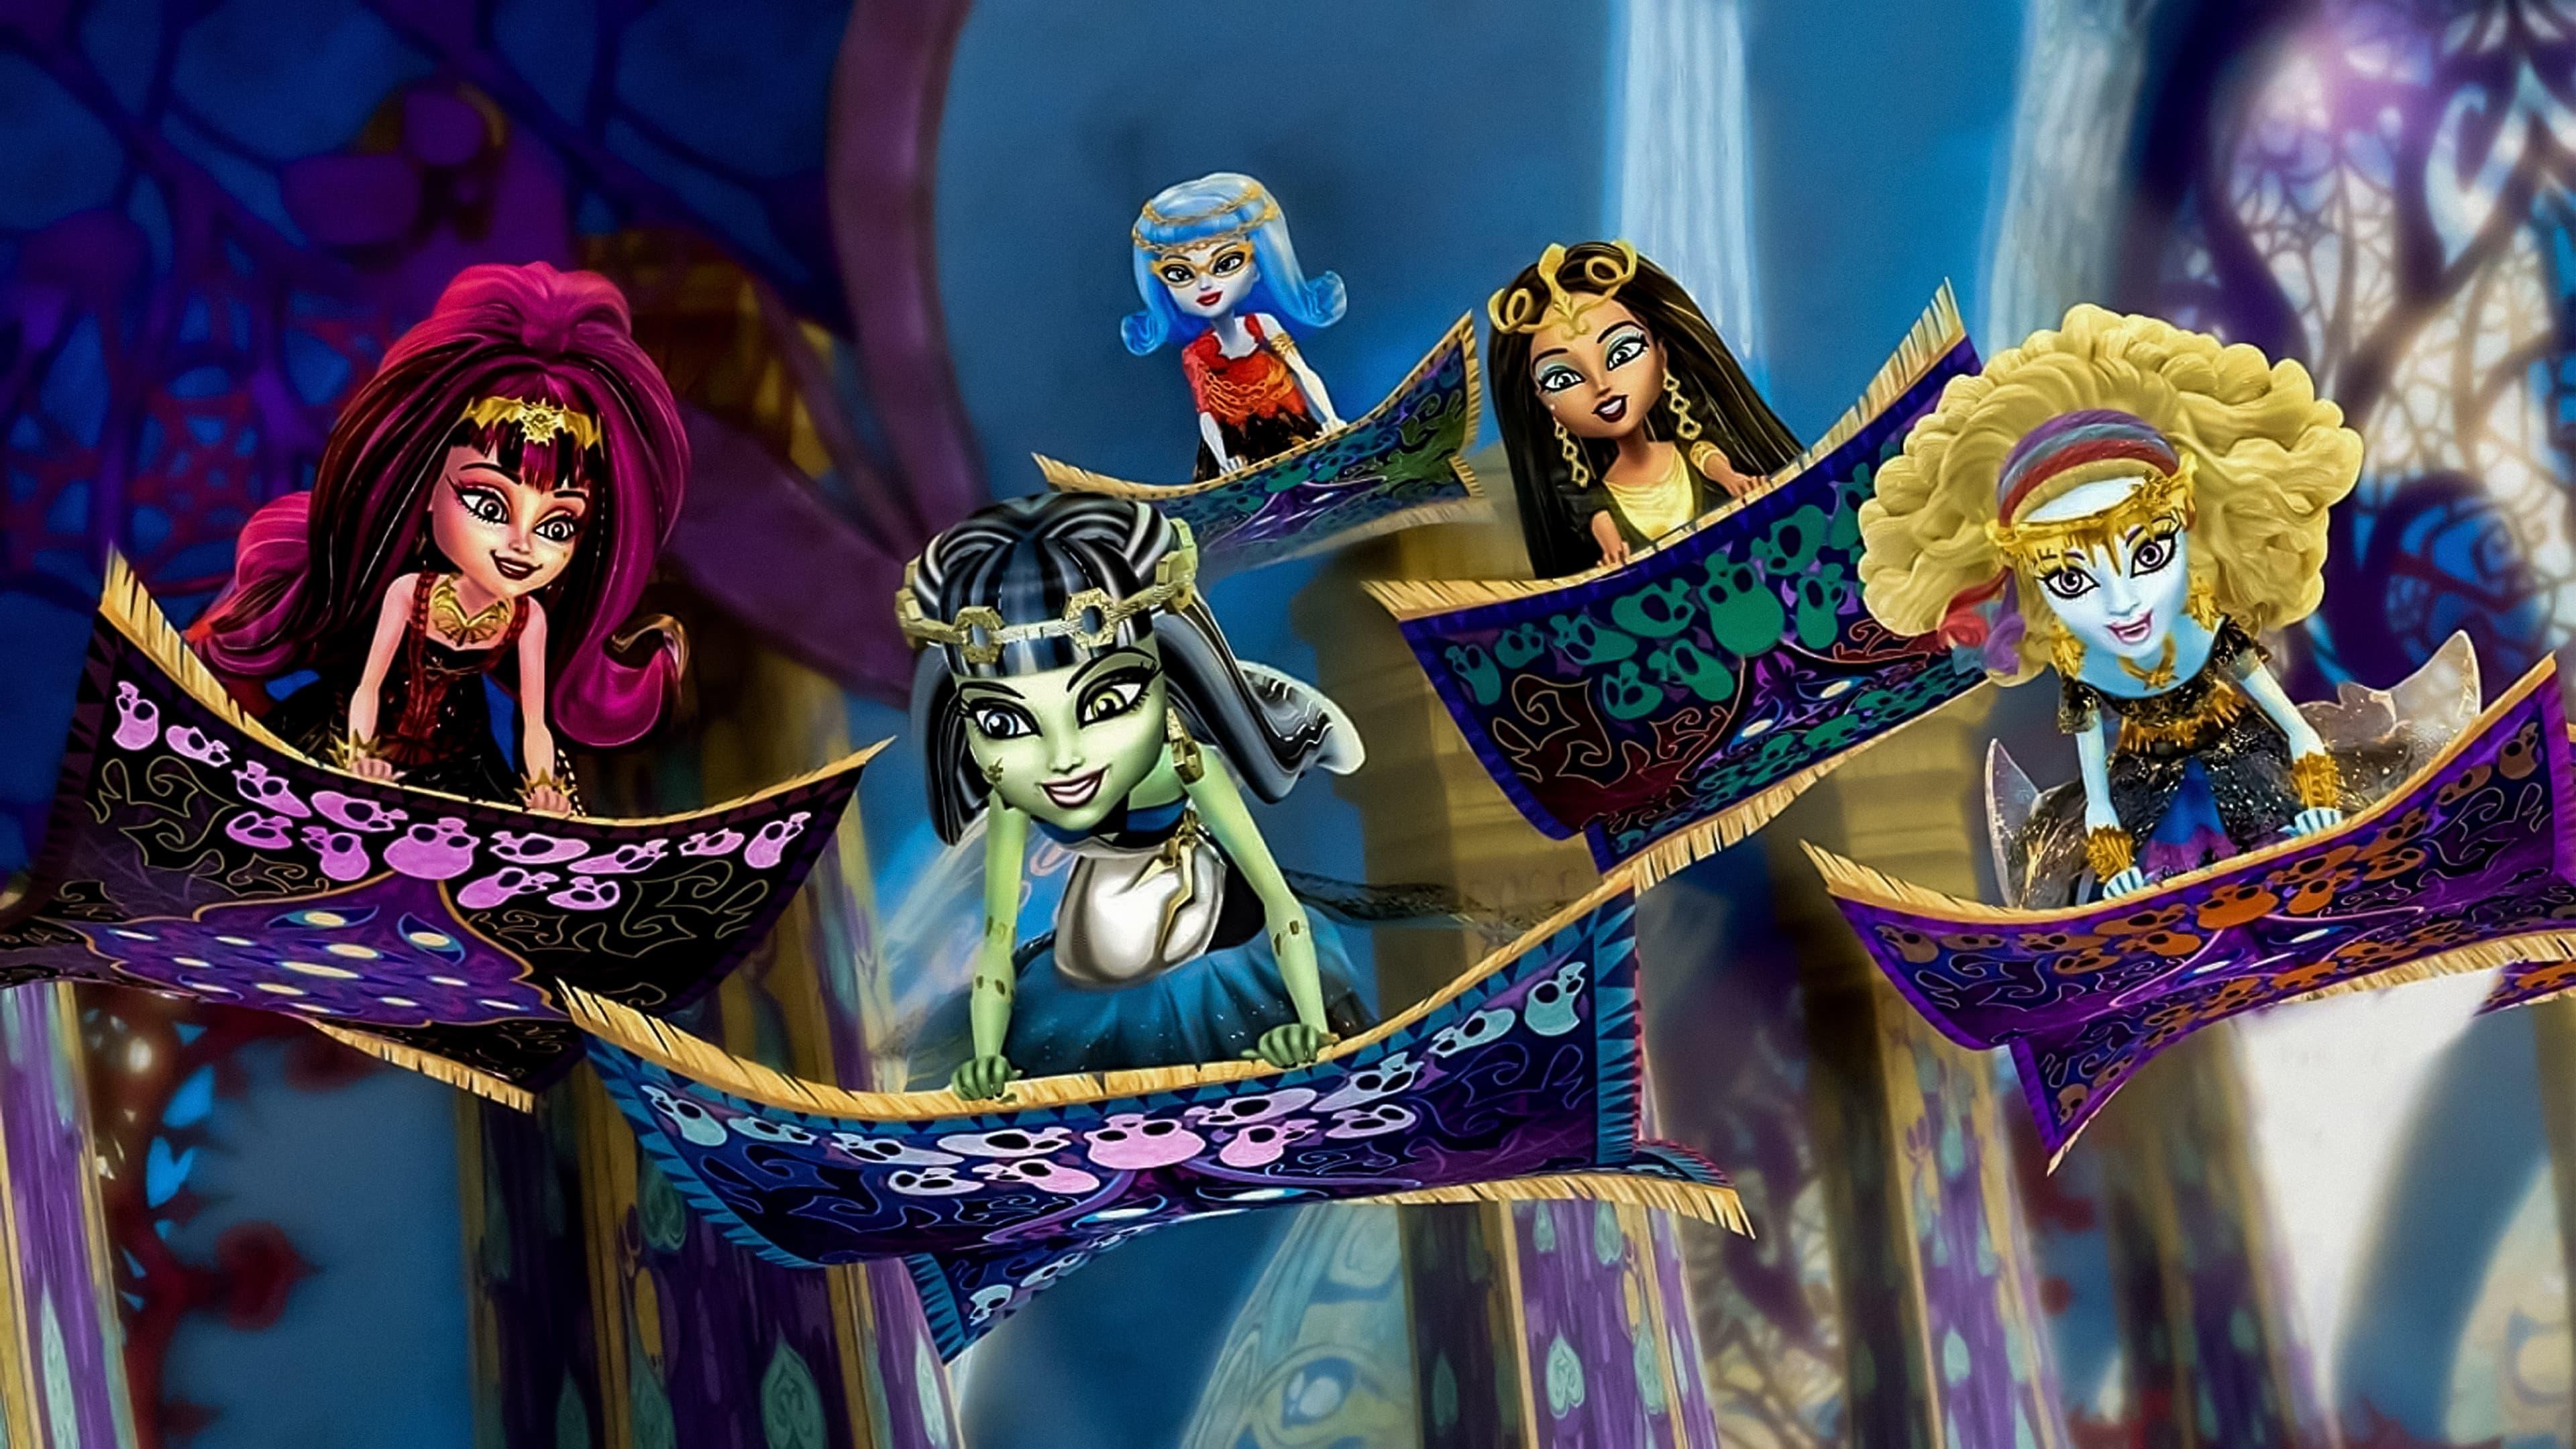 Monster High: 13 Wishes backdrop